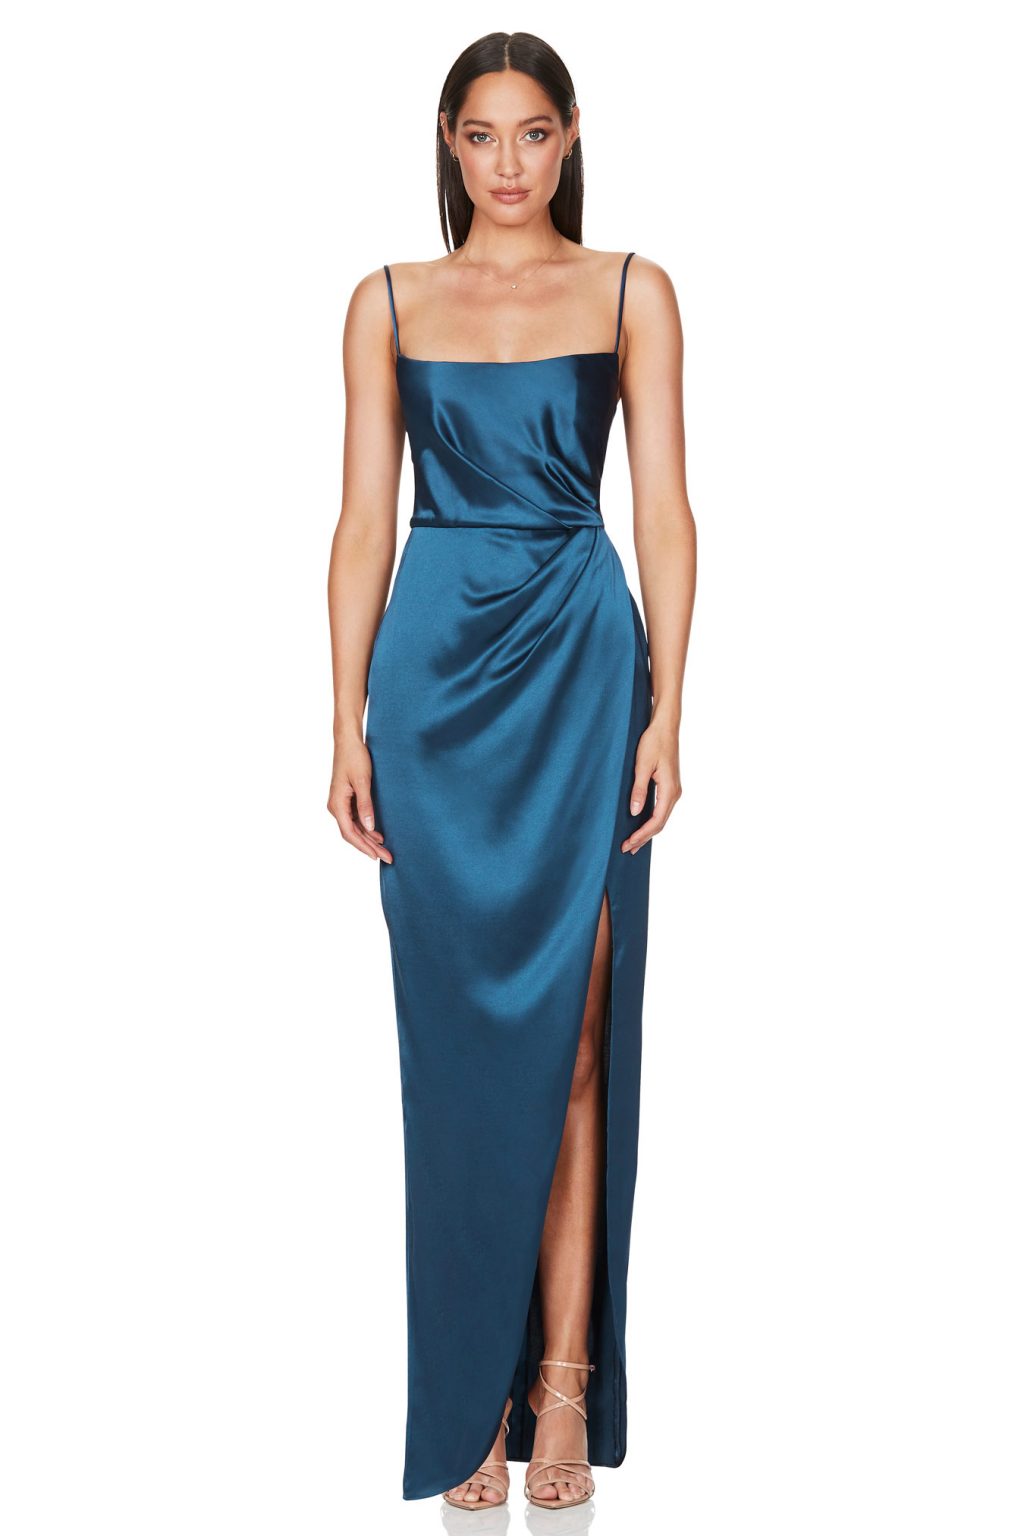 Nookie Amelia Gown Midnight - Dresses 4 Hire